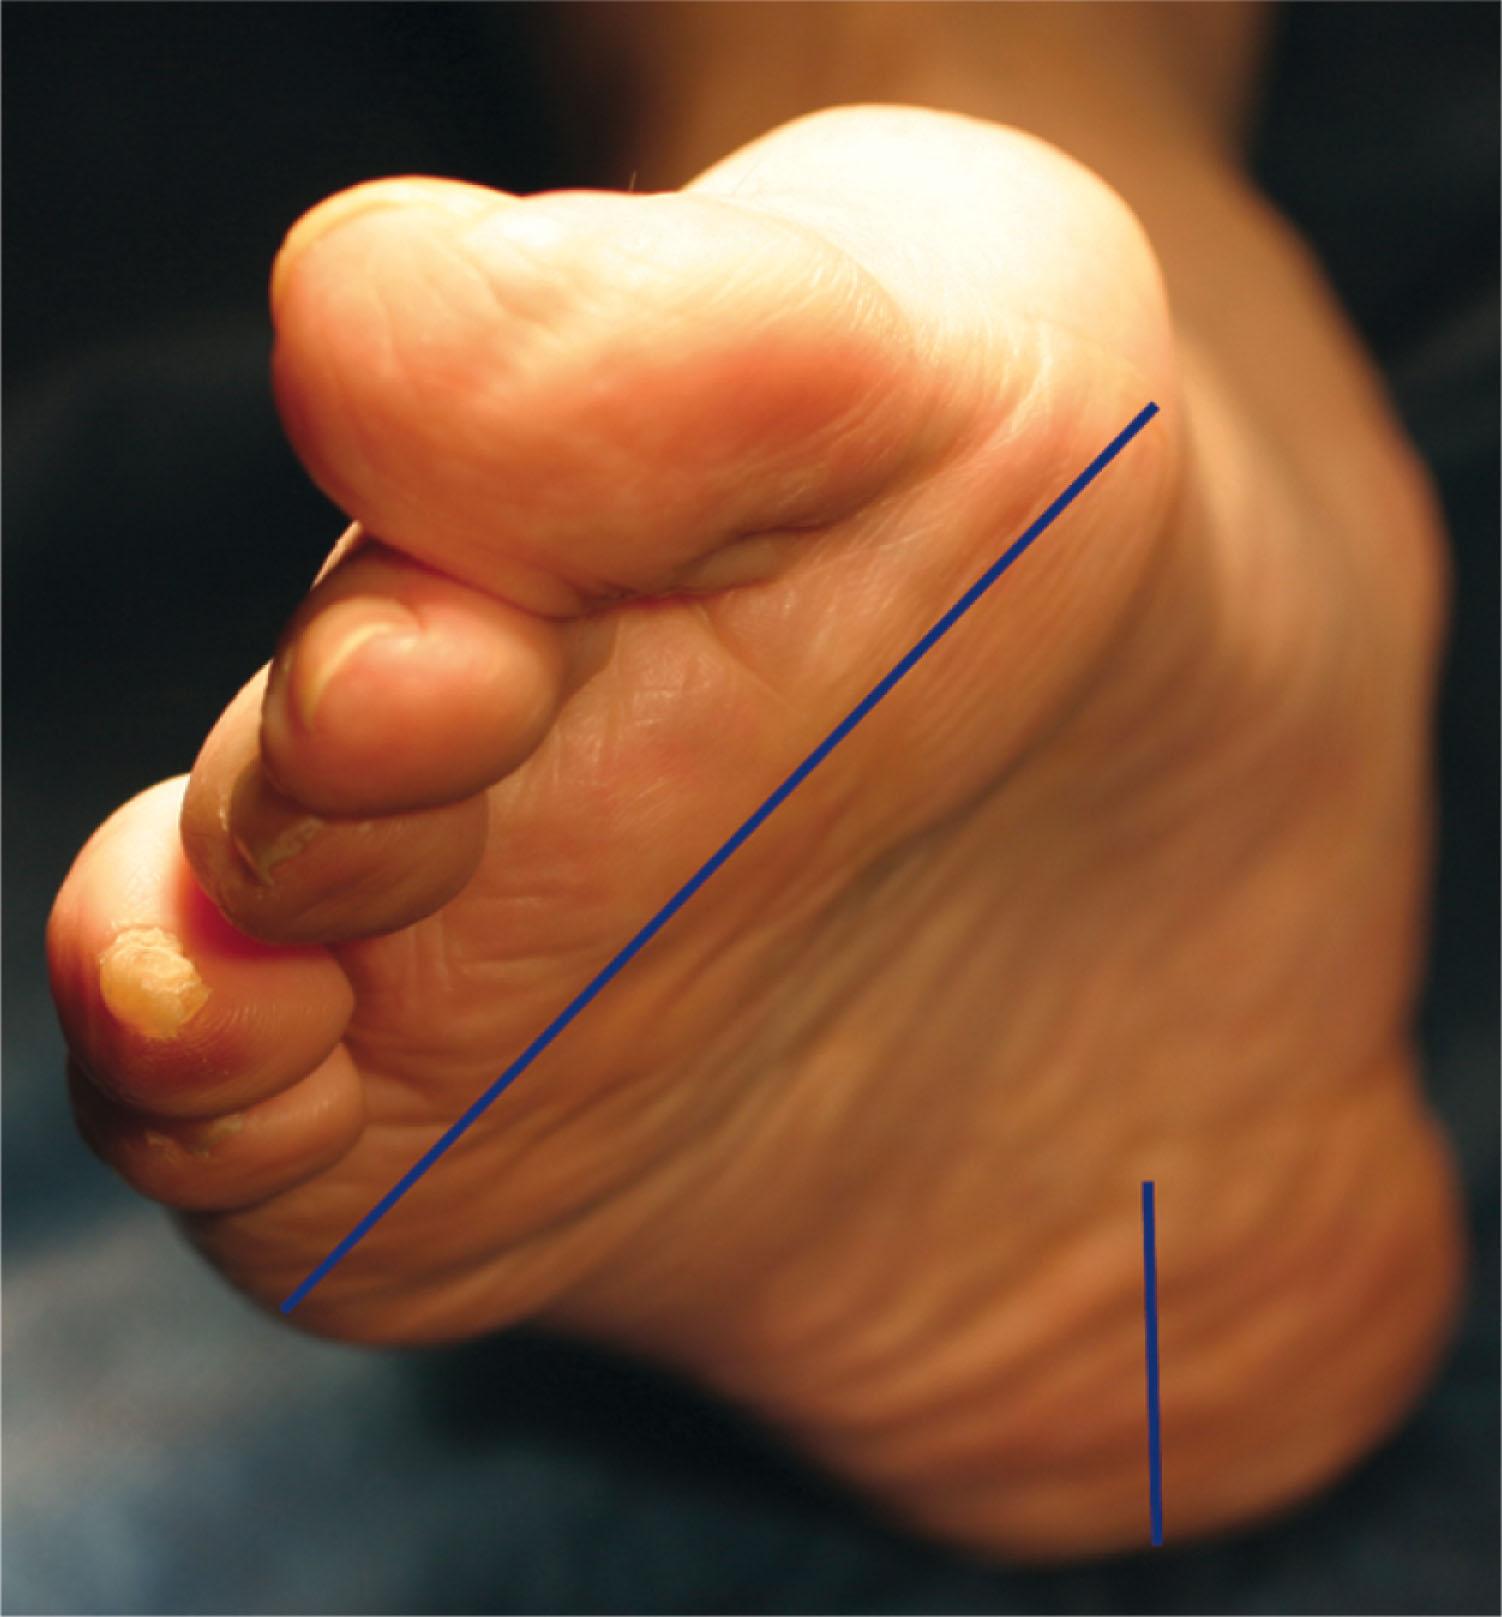 Fig. 29-4, Demonstration of forefoot varus. The degree of forefoot varus is determined by placing the heel in neutral position, covering the head of the talus with the navicular, and then observing the relationship of the metatarsal heads to the neutral hindfoot. In fixed forefoot varus, the lateral border of the foot is more plantar flexed than the medial border.